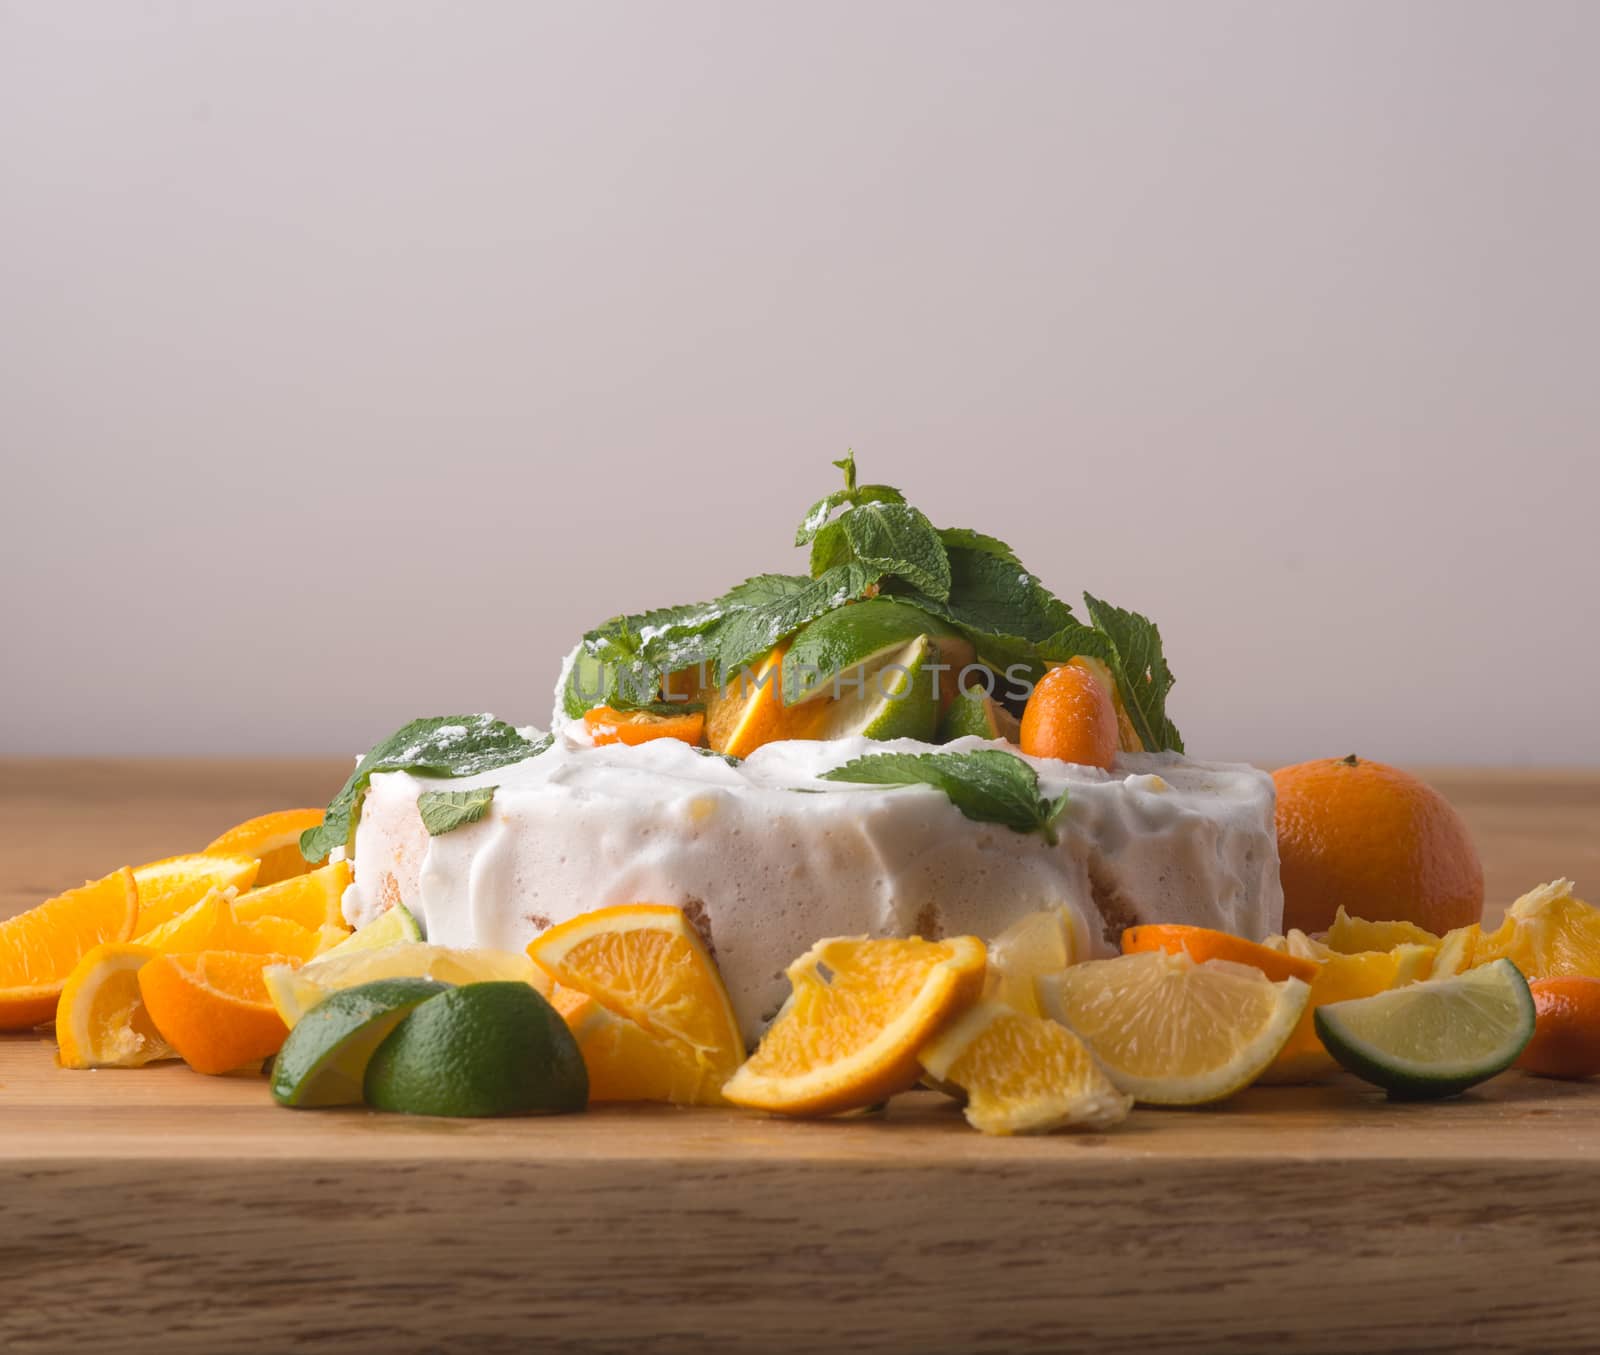 Fruit cake with cream, lime and oranges on table with light background